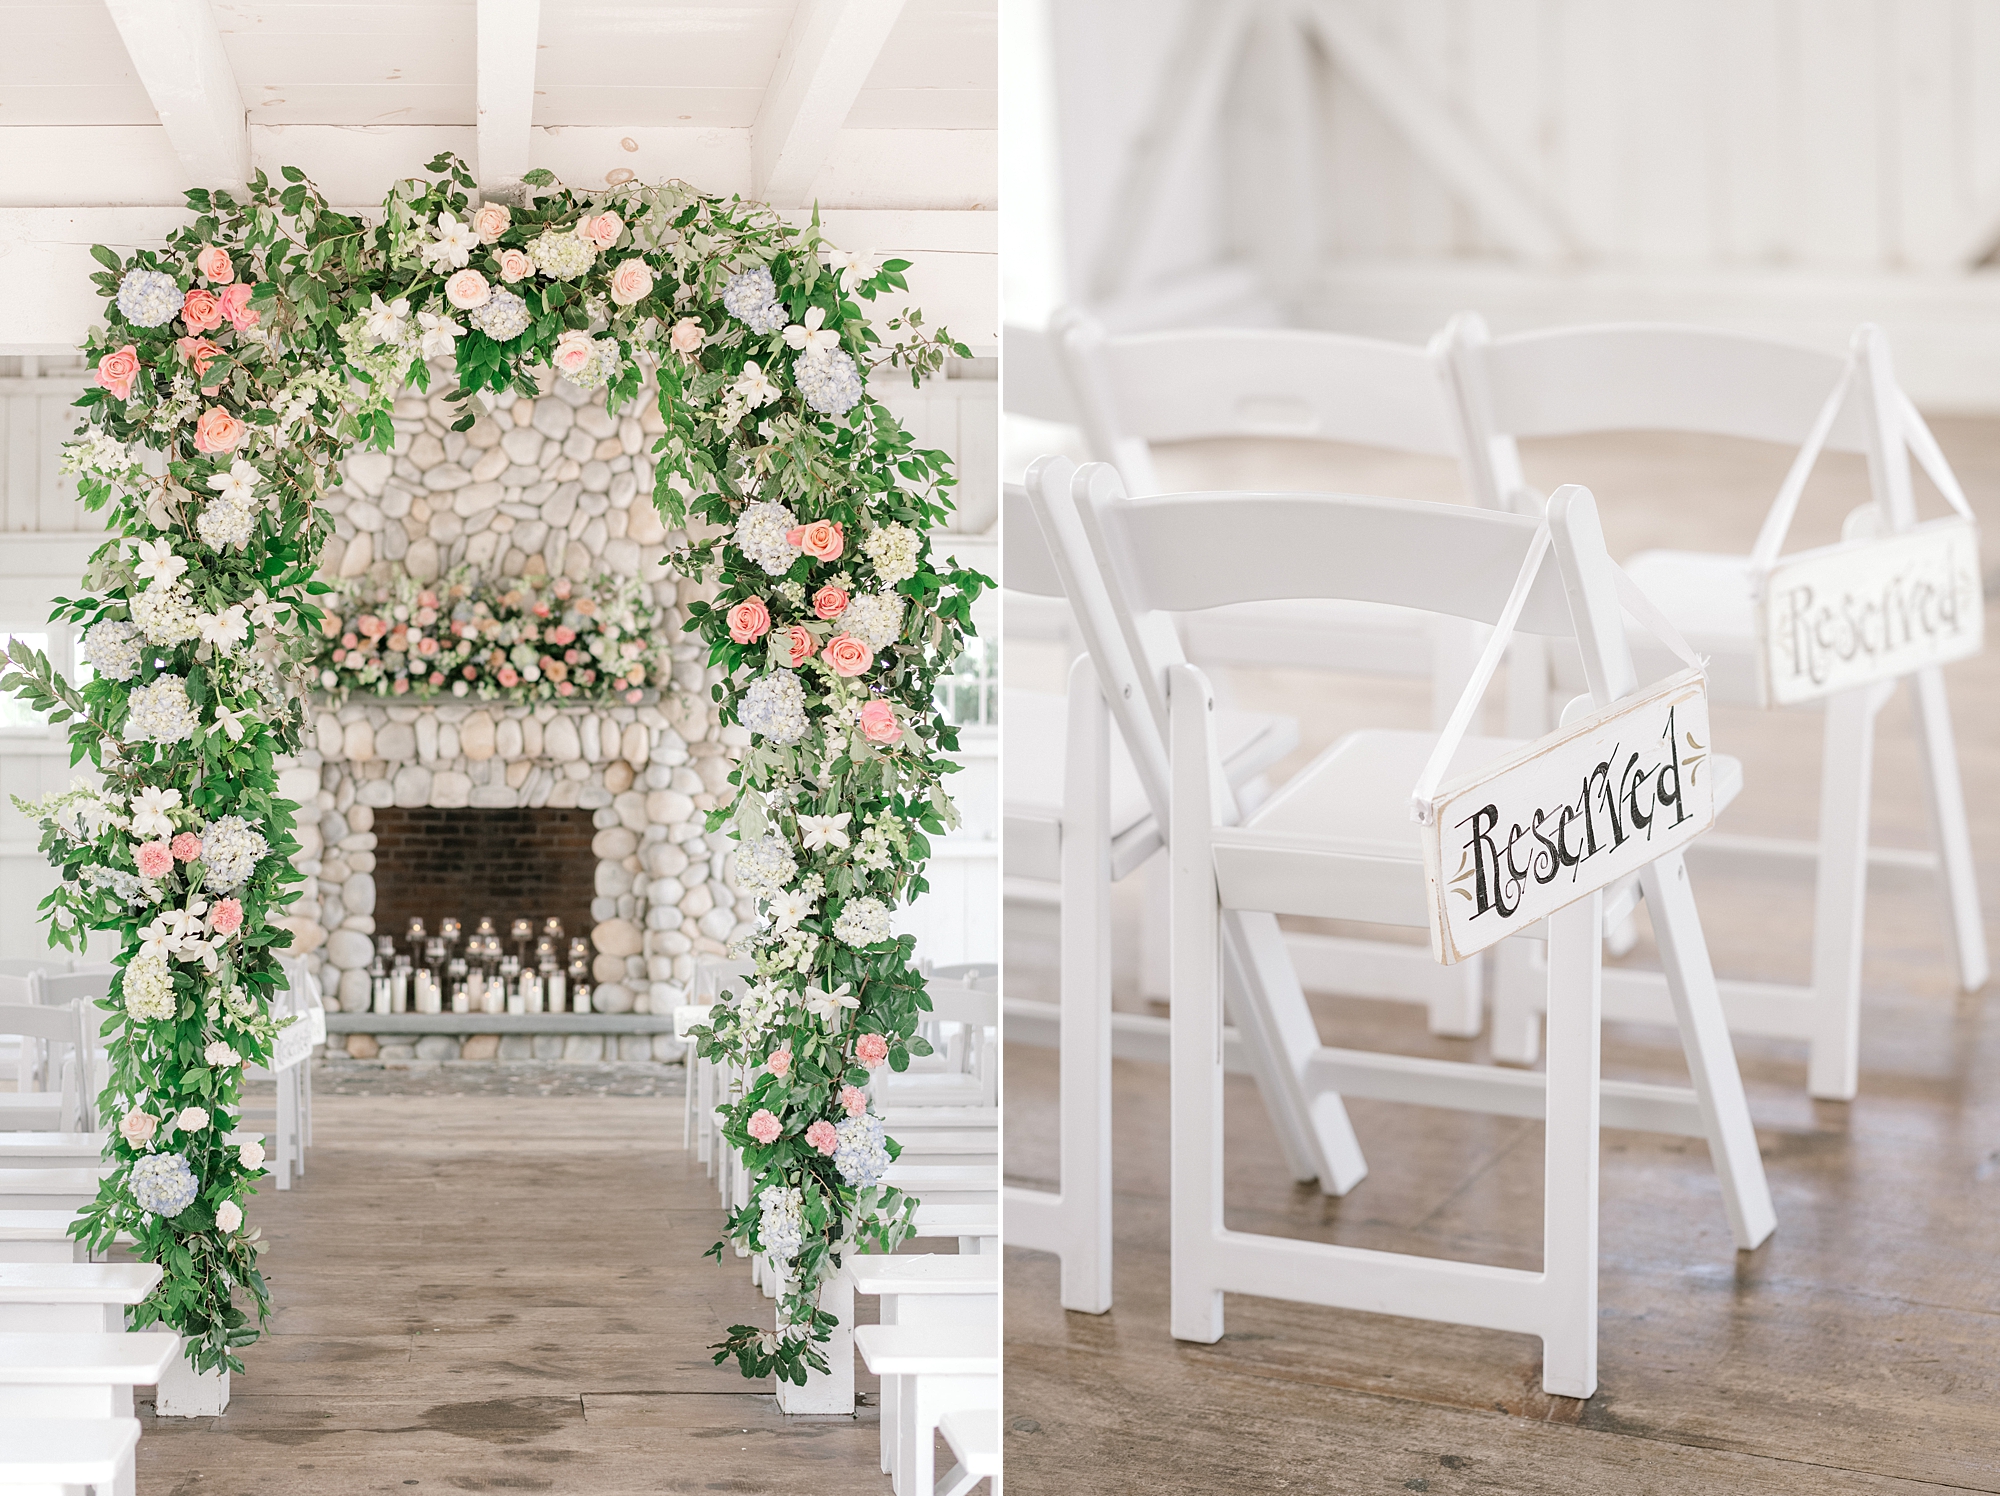 ceremony site in barn at Bonnet Island Estate with flower arbor